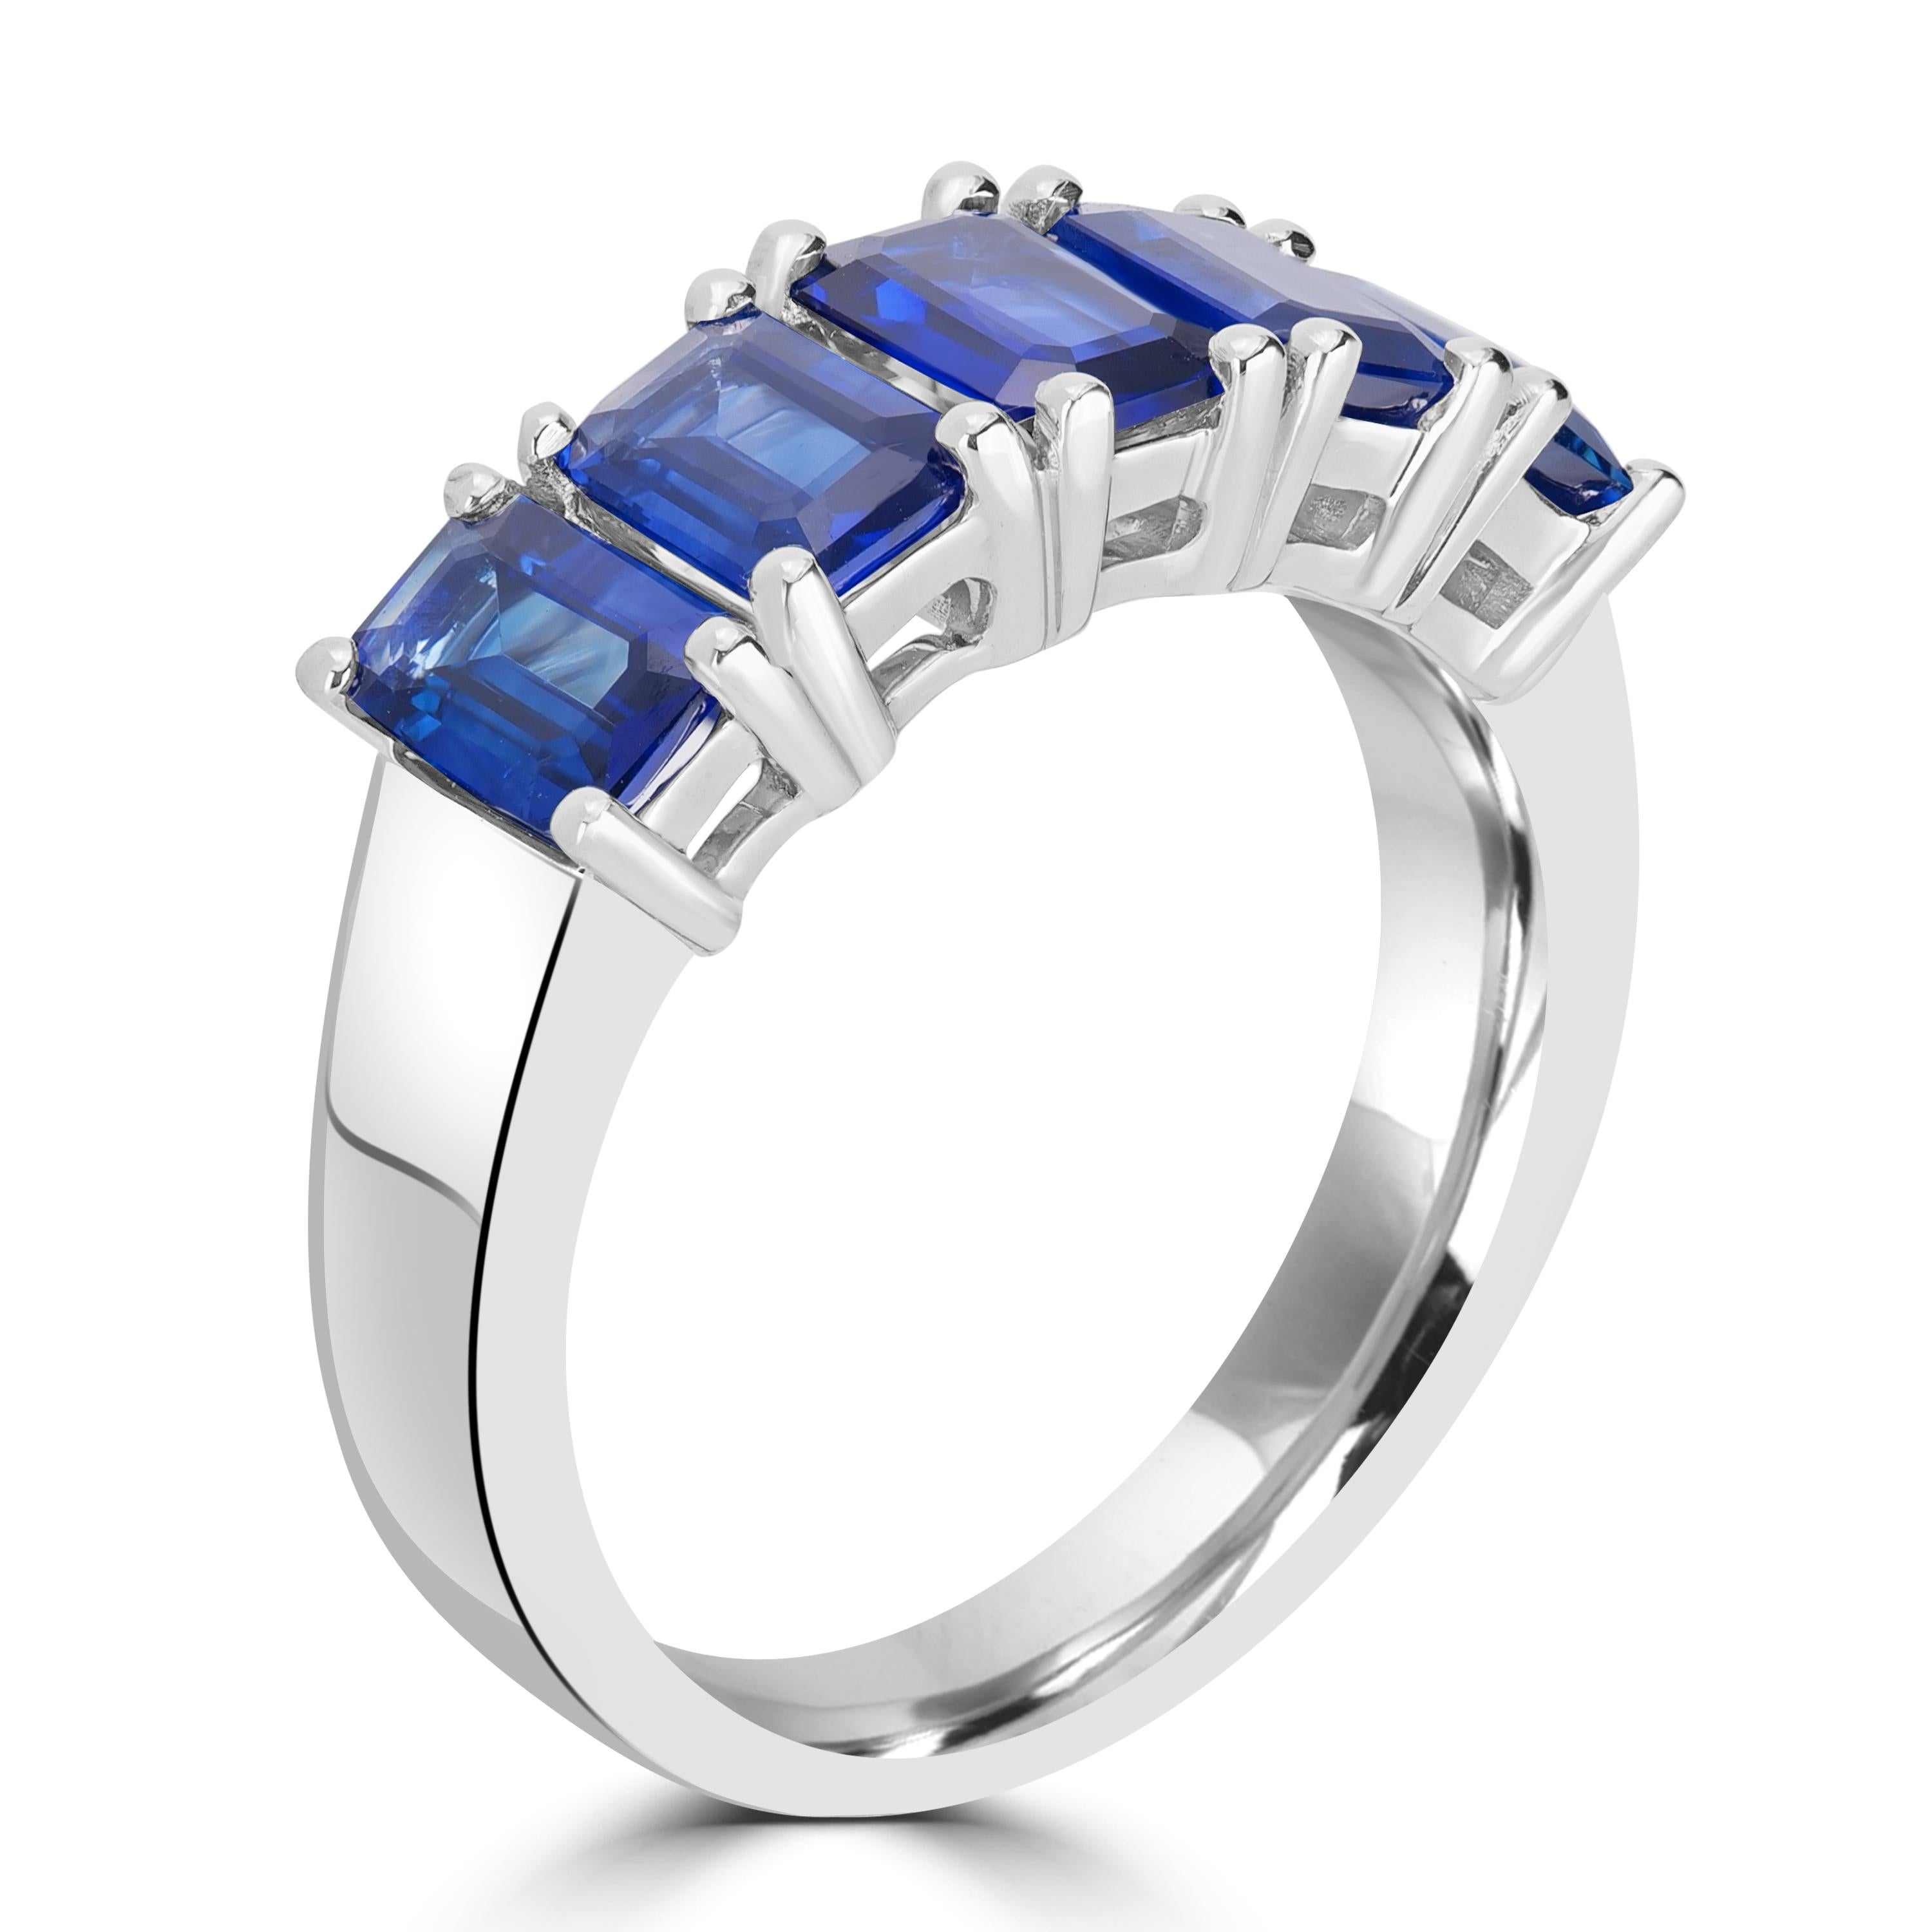 For Sale:  2.89 Carats Sapphire Emerald Cut Eternity Ring in 18K White Gold 2